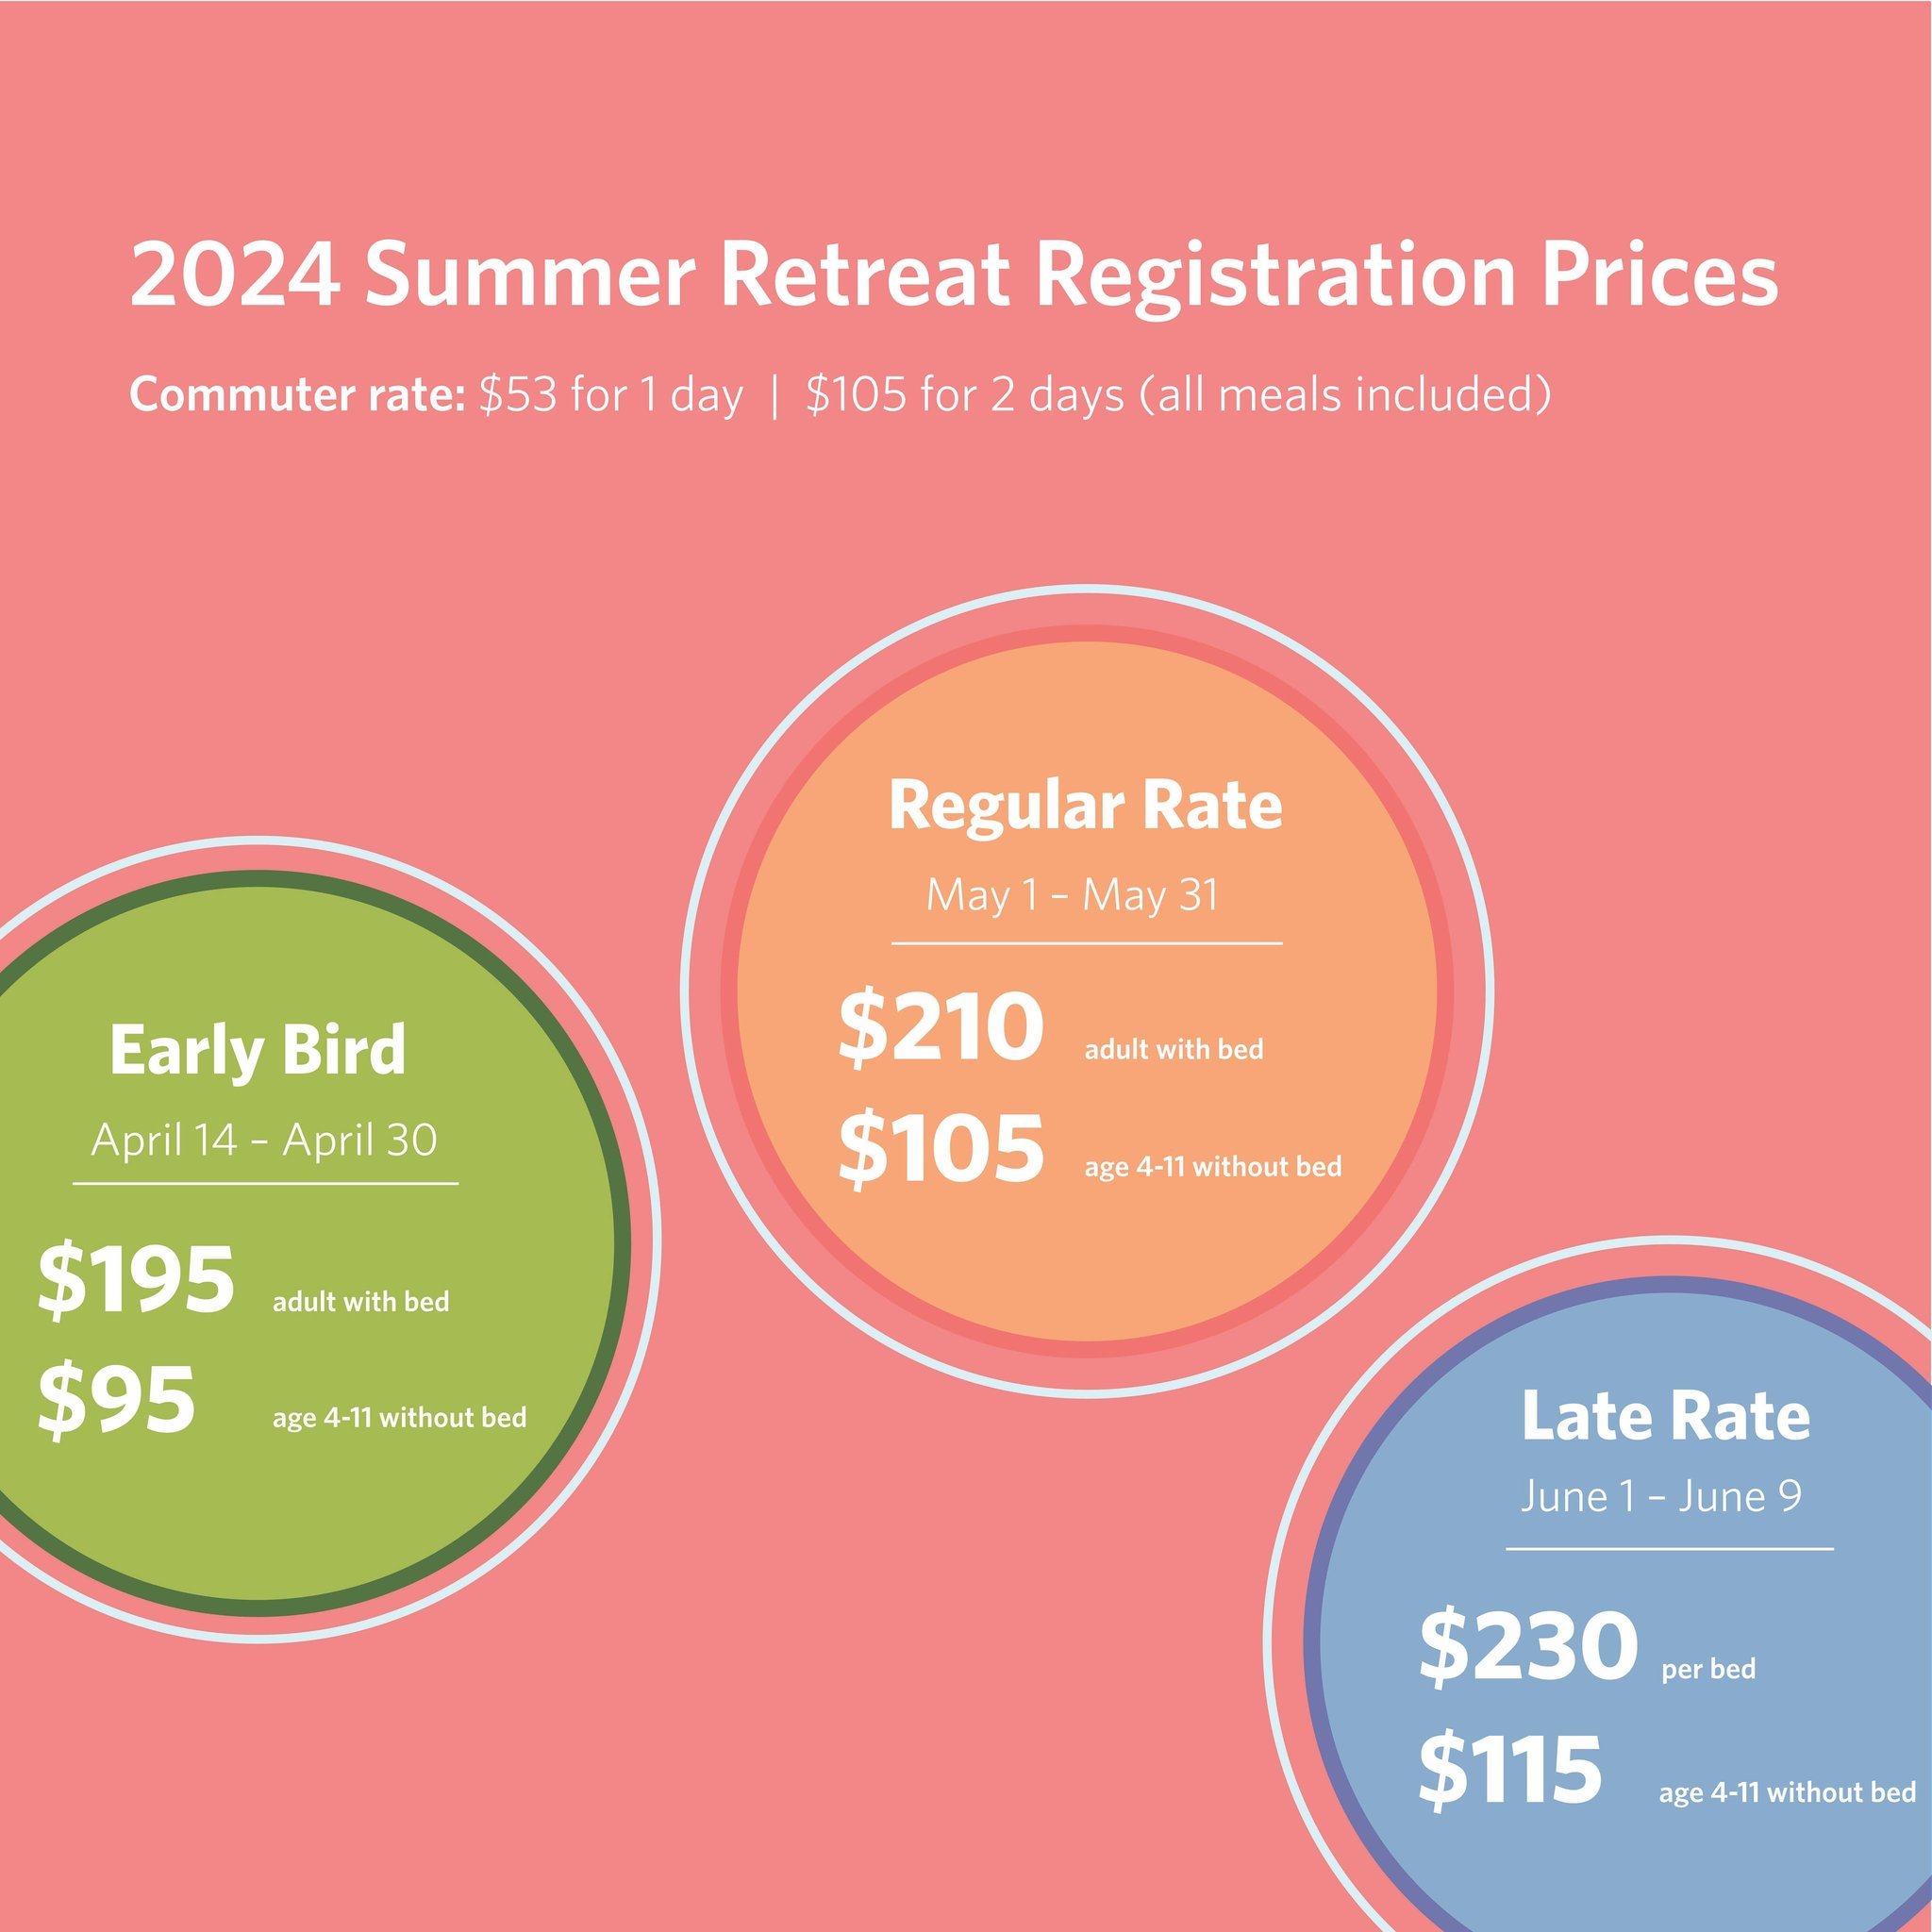 Hey everyone! Don&rsquo;t forget tomorrow is the last day to sign up for early bird retreat prices!

CFC Summer Retreat will be happening July 5 - 7 at Sonoma State University. The early bird price: ($195 for an adult with a bed, $95 for child (age 4